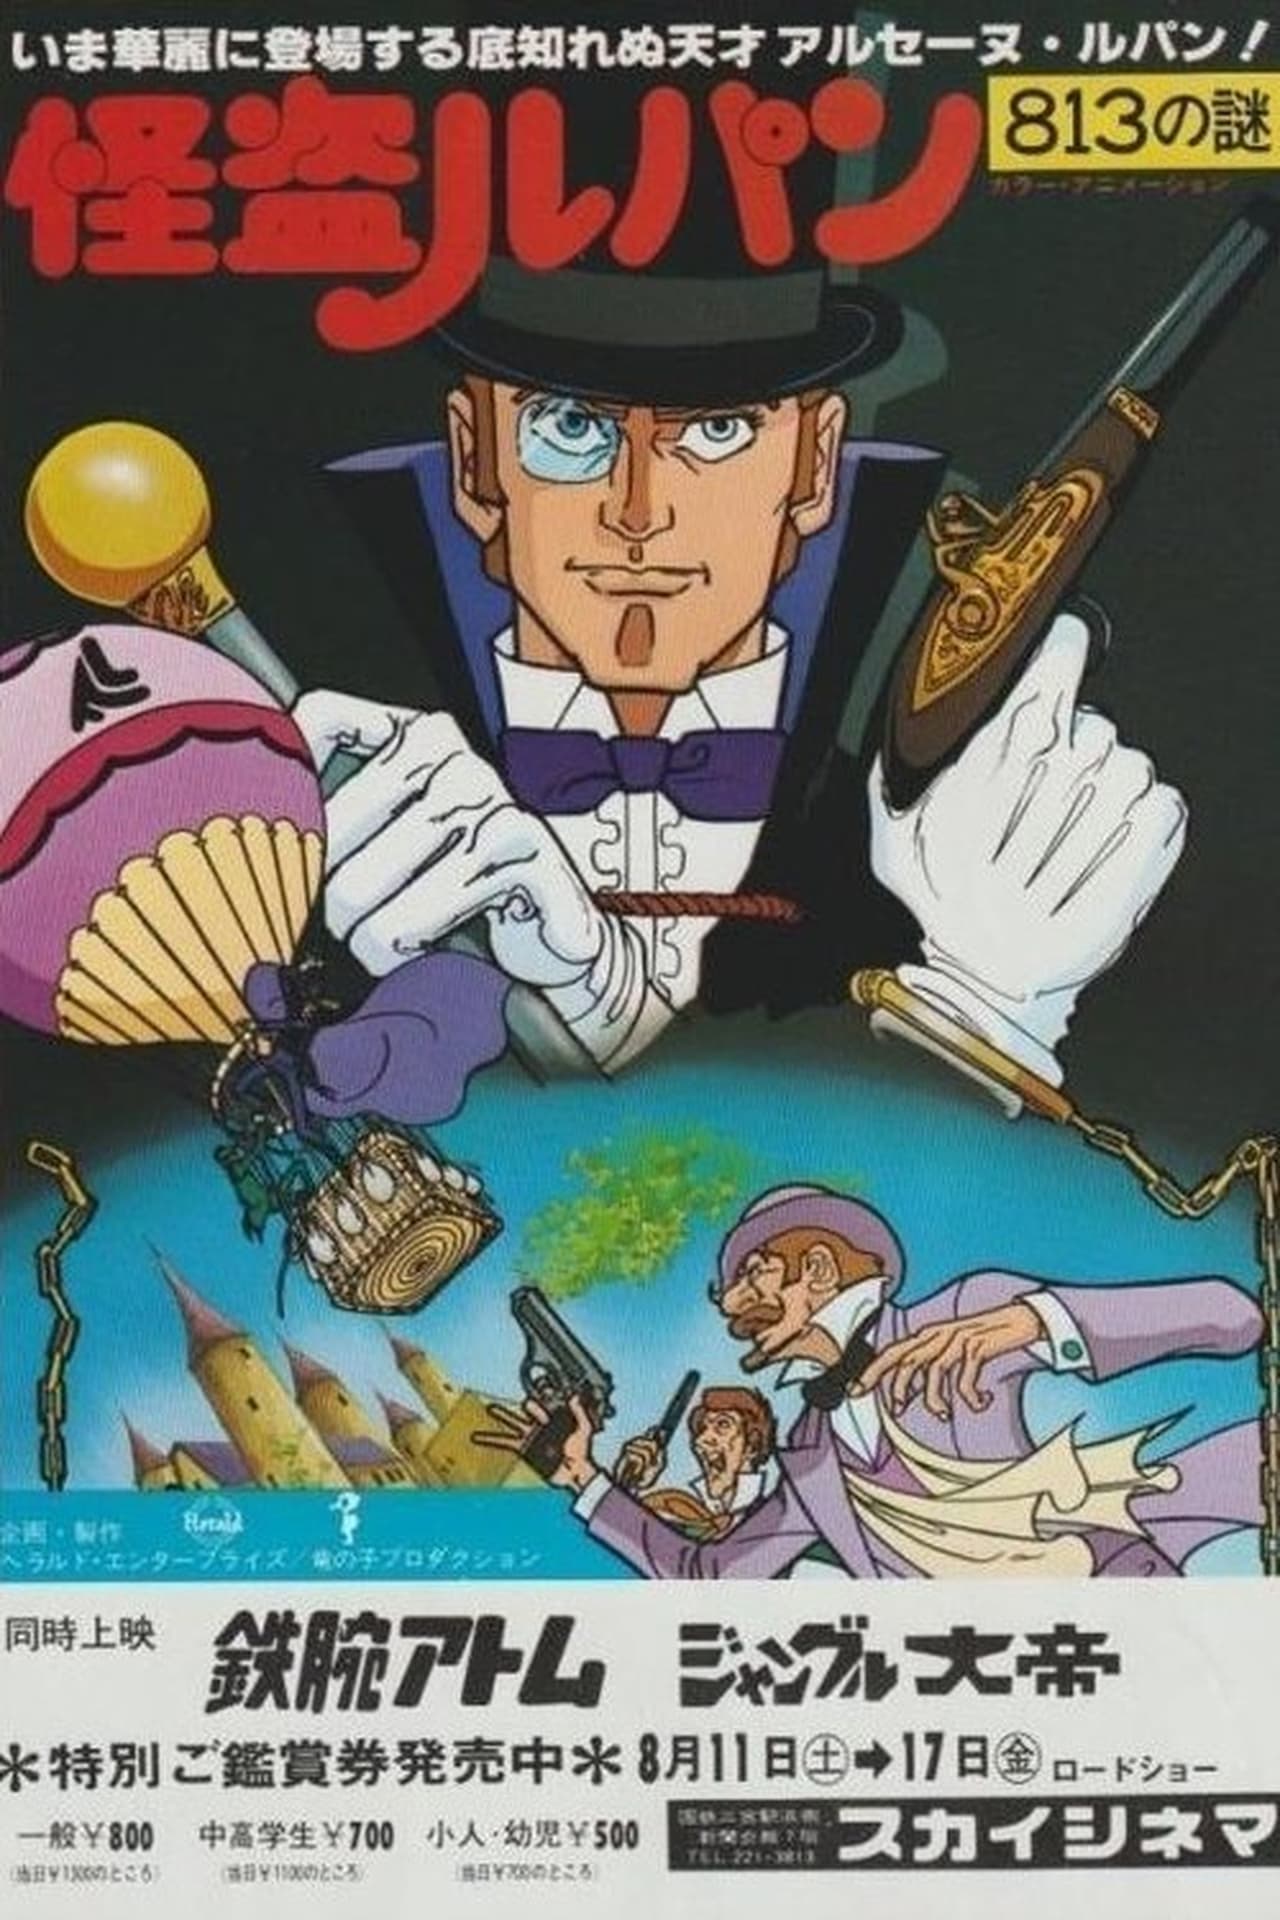 Lupin the Thief--Enigma of the 813